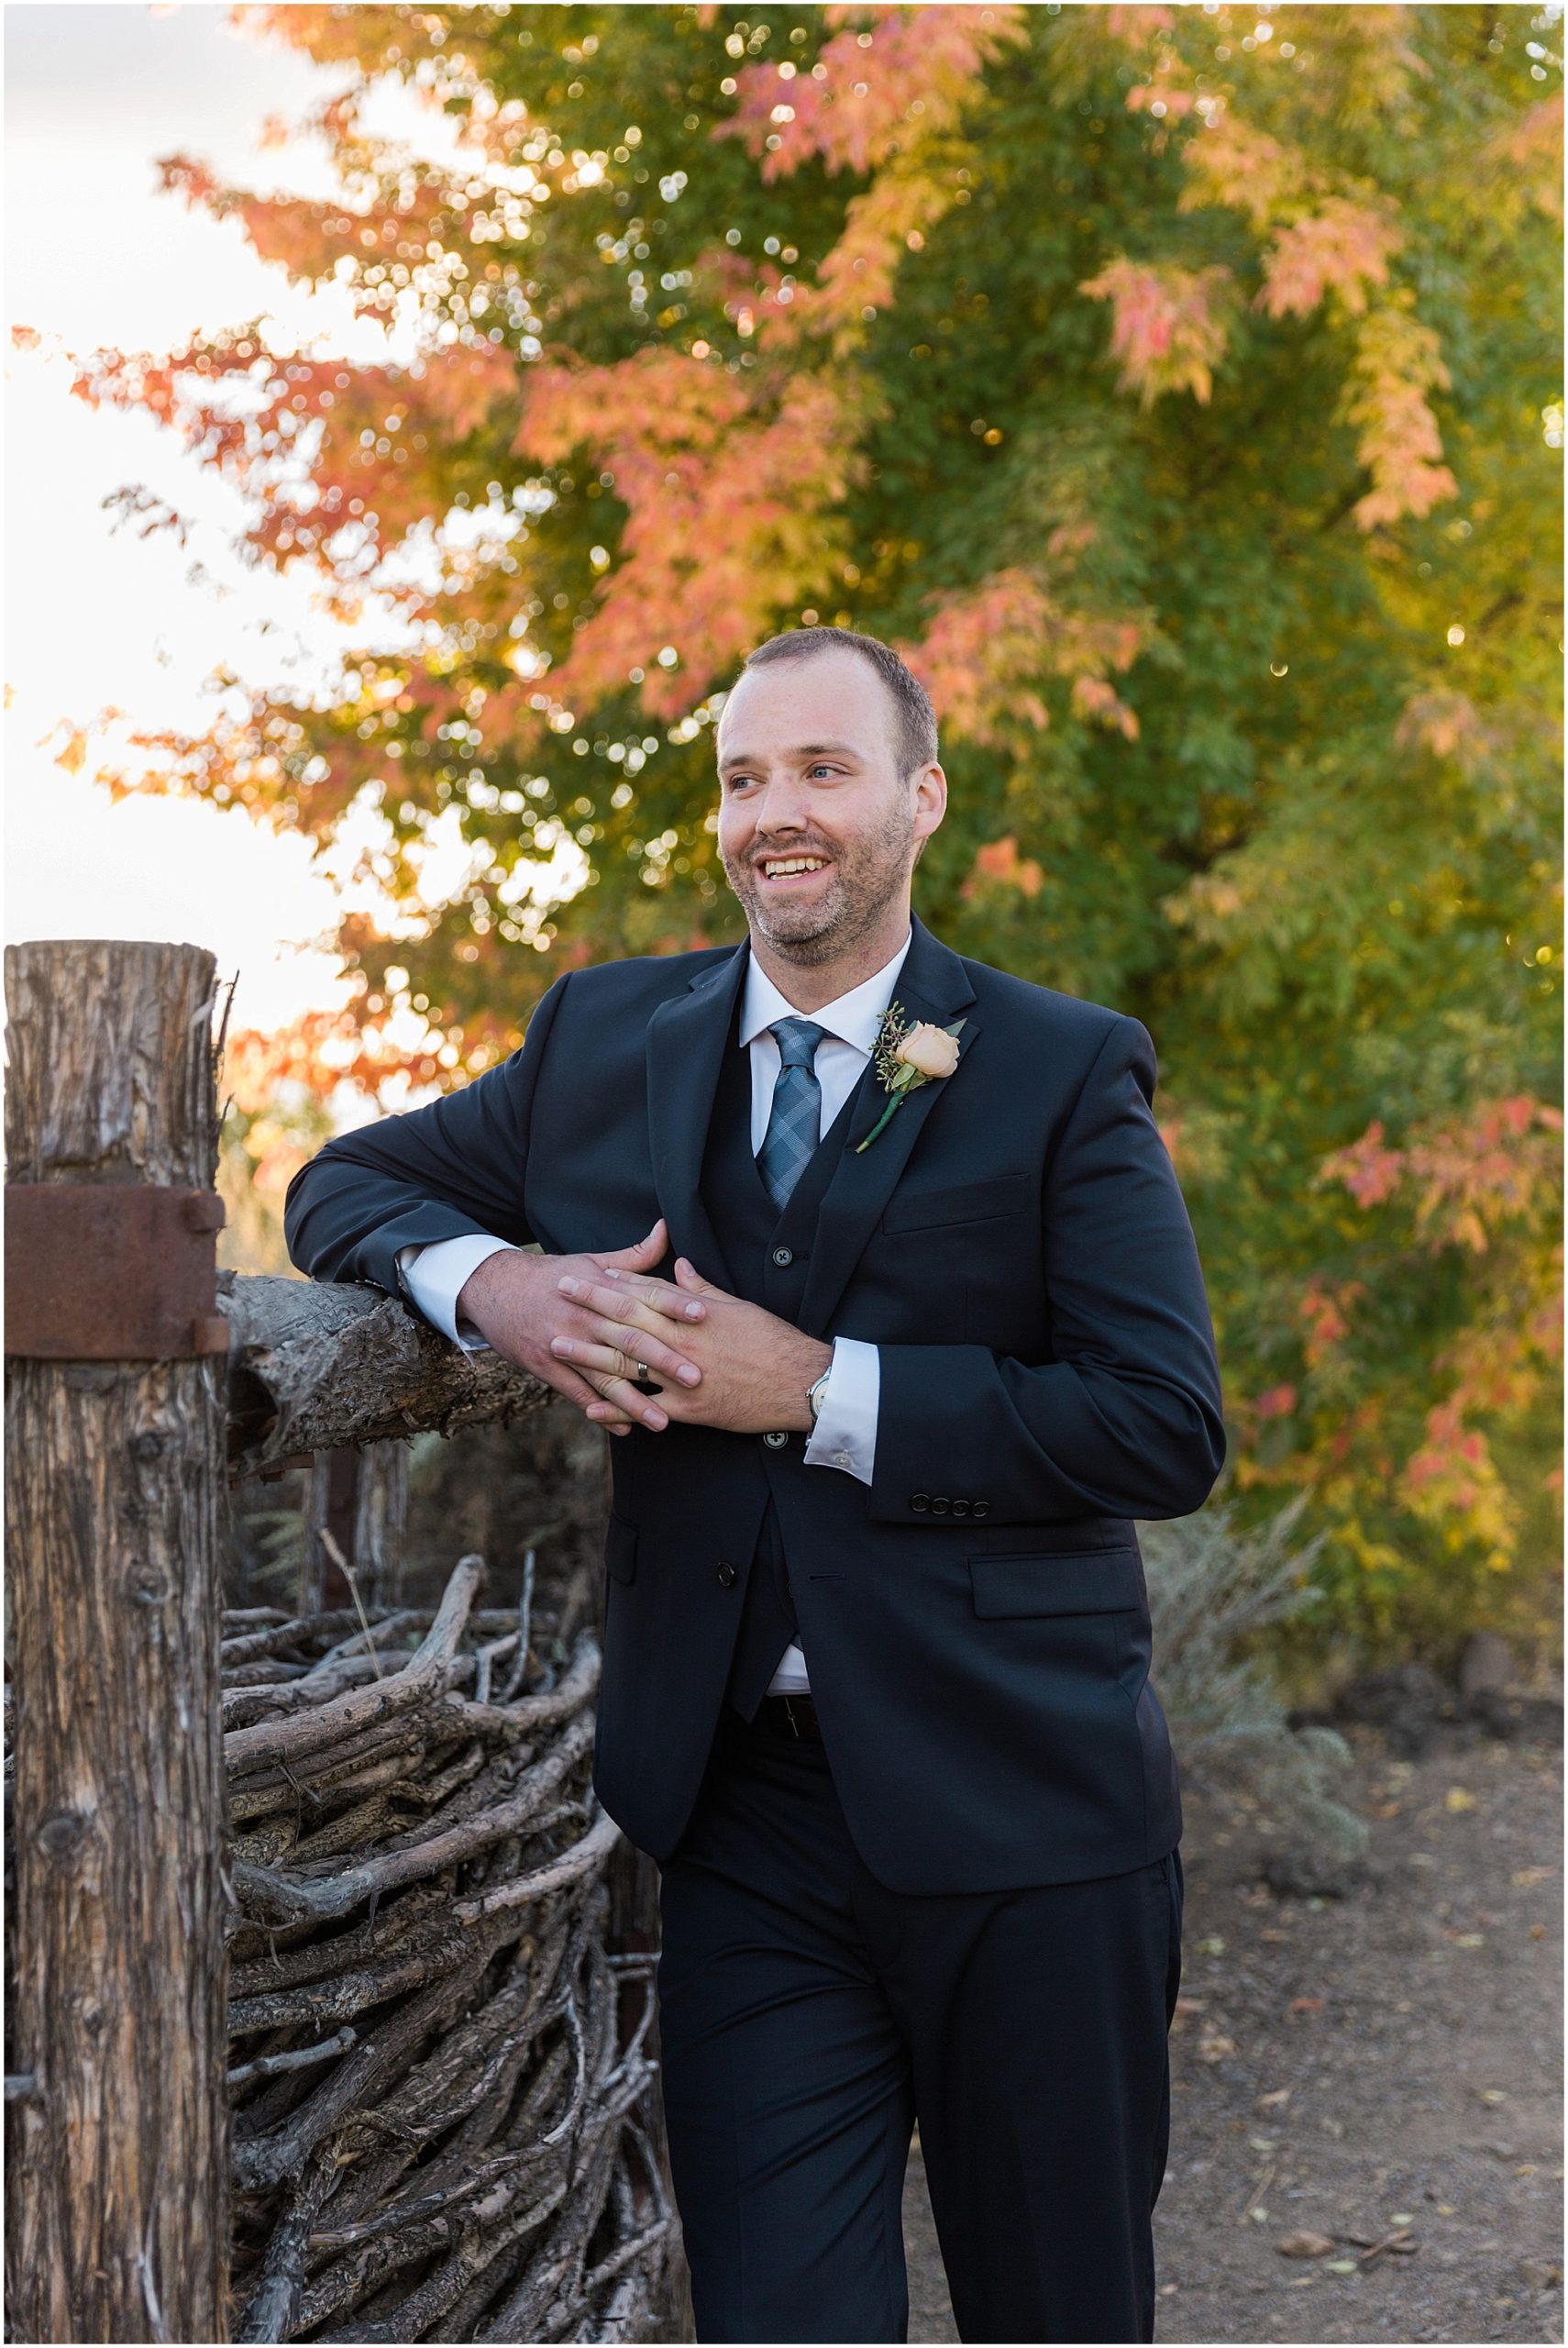 The groom admires his bride during her bridal portraits at this Ranch at the Canyons fall wedding. | Erica Swantek Photography